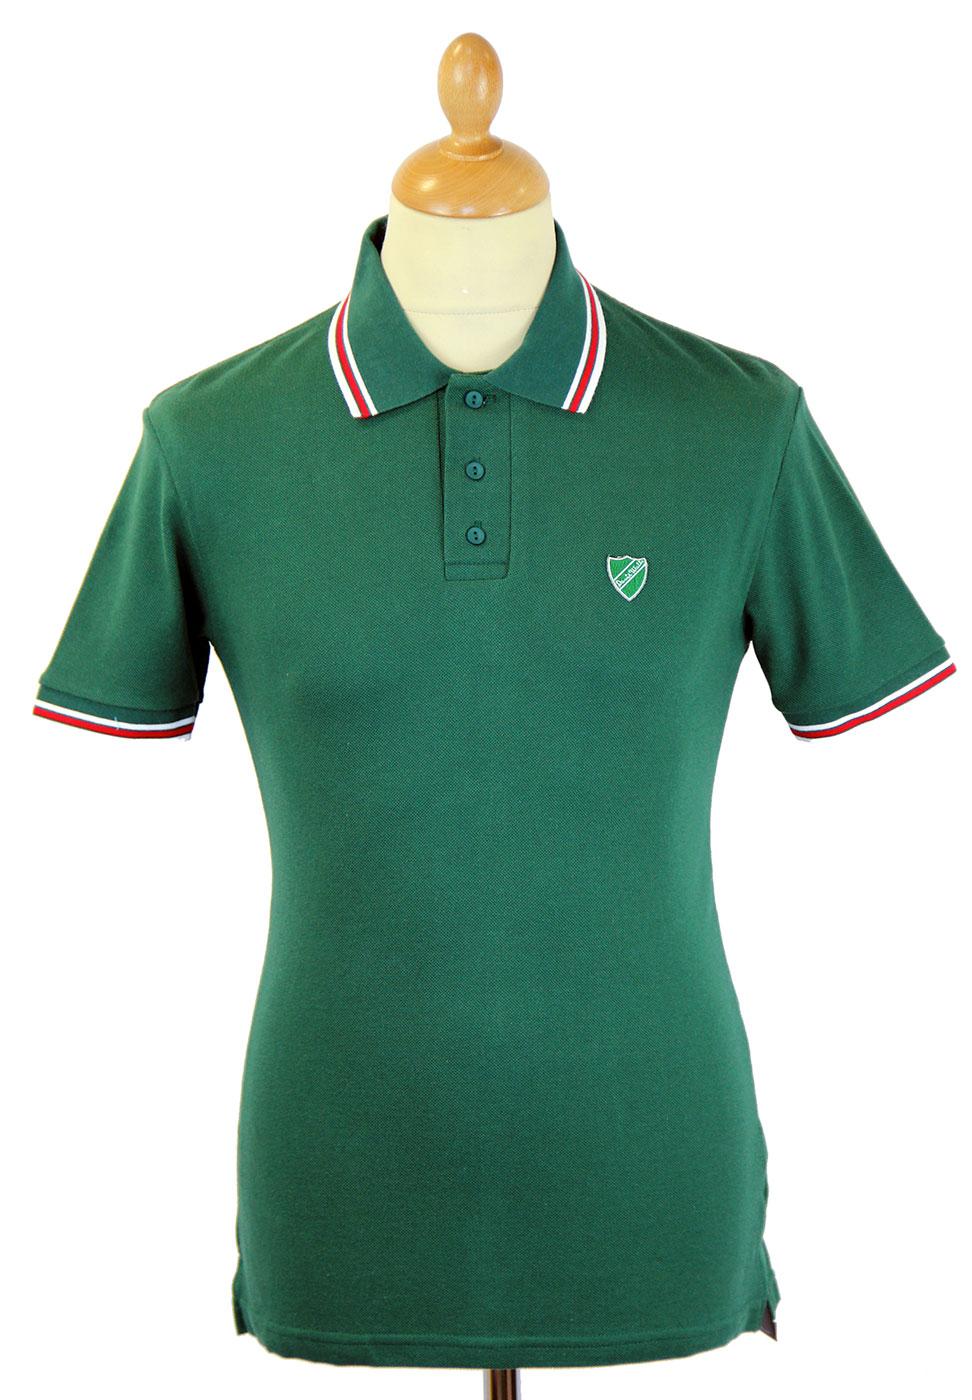 DAVID WATTS Retro Indie Mod Made in Great Britain Polo Green